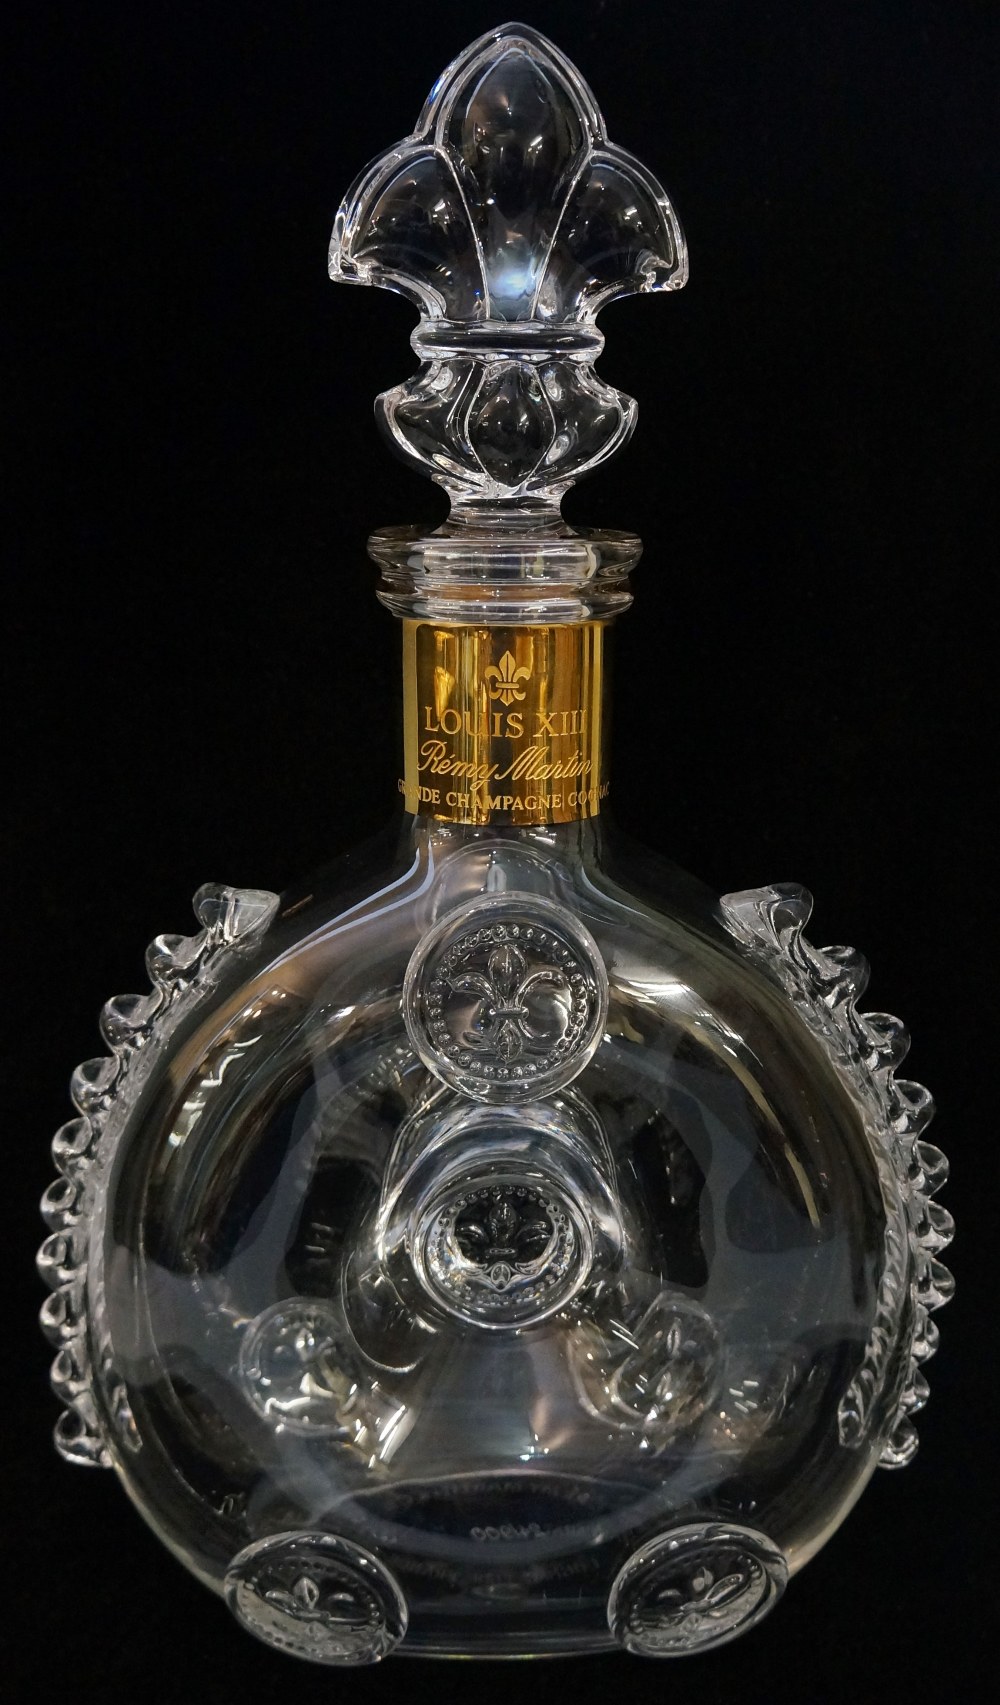 A limited edition (24/900) Louis XIII Remy Martin Grande Champagne Cognac glass decanter by - Image 2 of 2